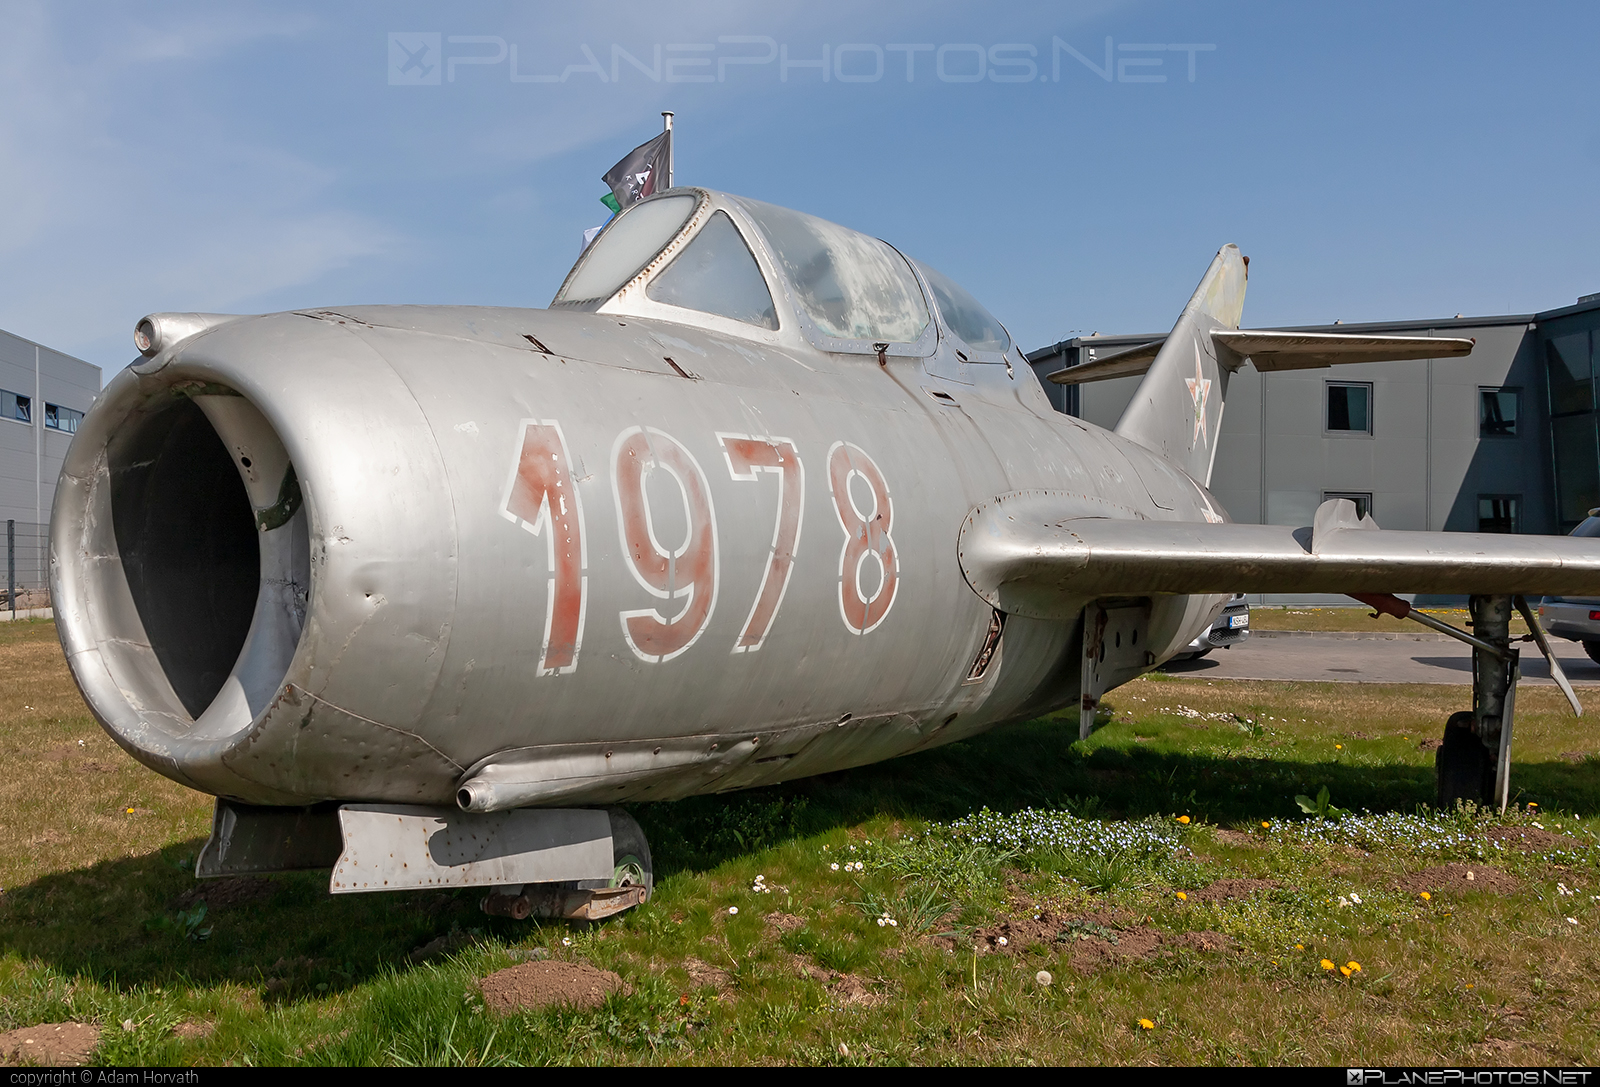 PZL-Mielec SB Lim-1 - 033 operated by Magyar Néphadsereg (Hungarian People's Army) #hungarianpeoplesarmy #magyarnephadsereg #mig15 #mig15uti #pzl #pzlmielec #sblim1